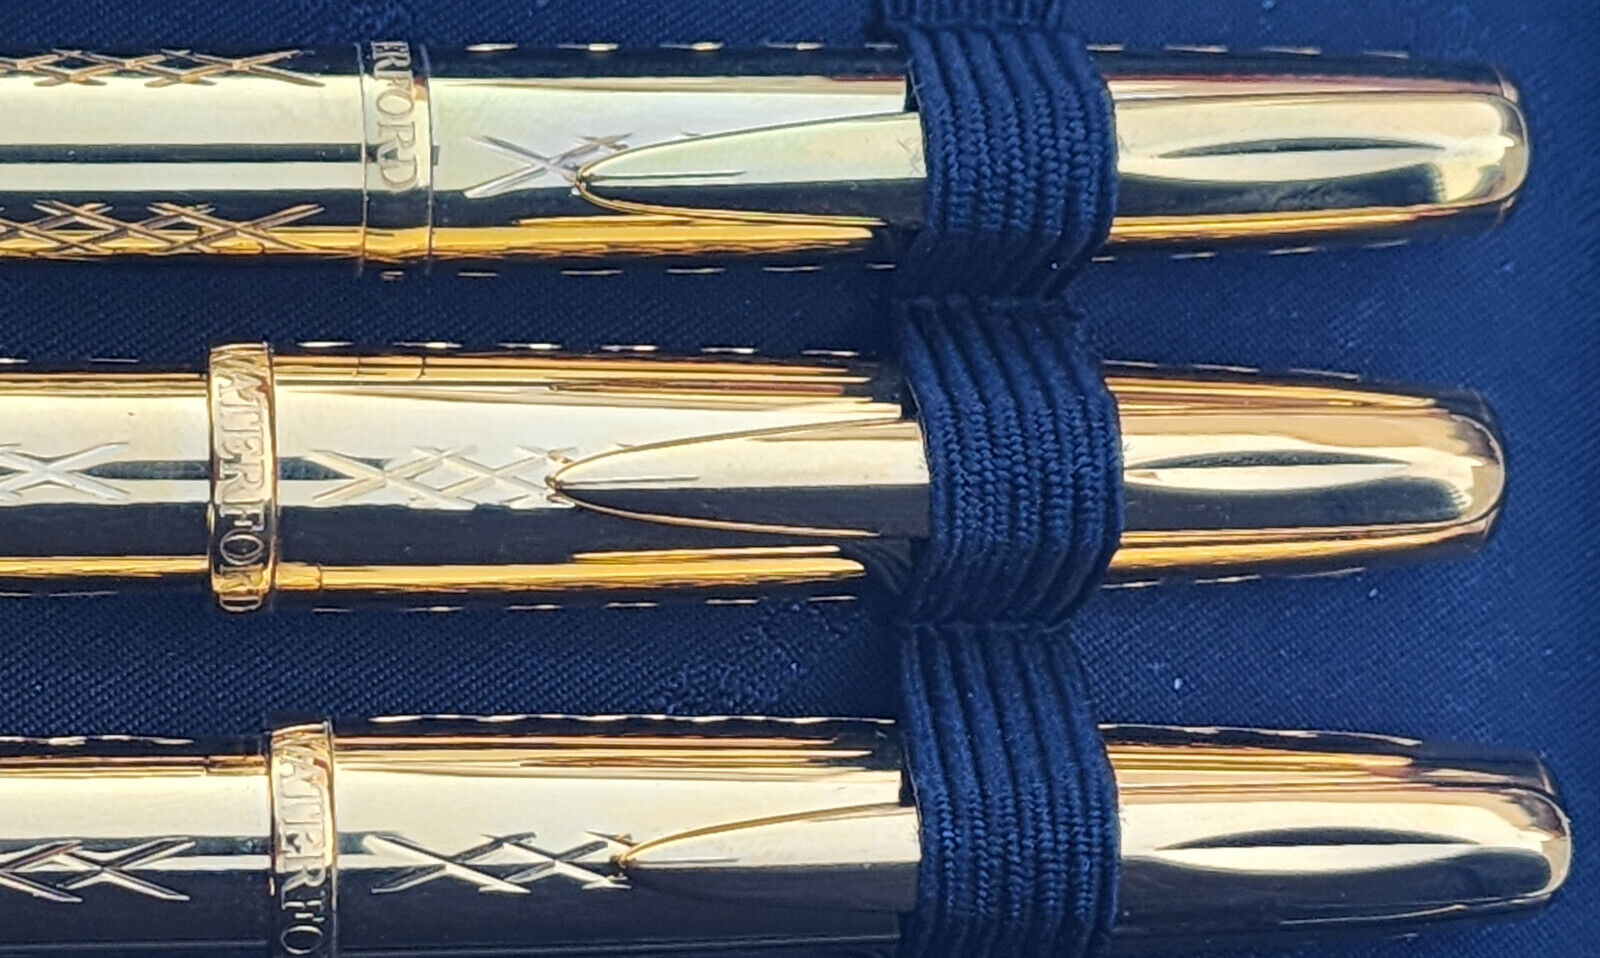 Waterford Gold pens set, special edition, NEW